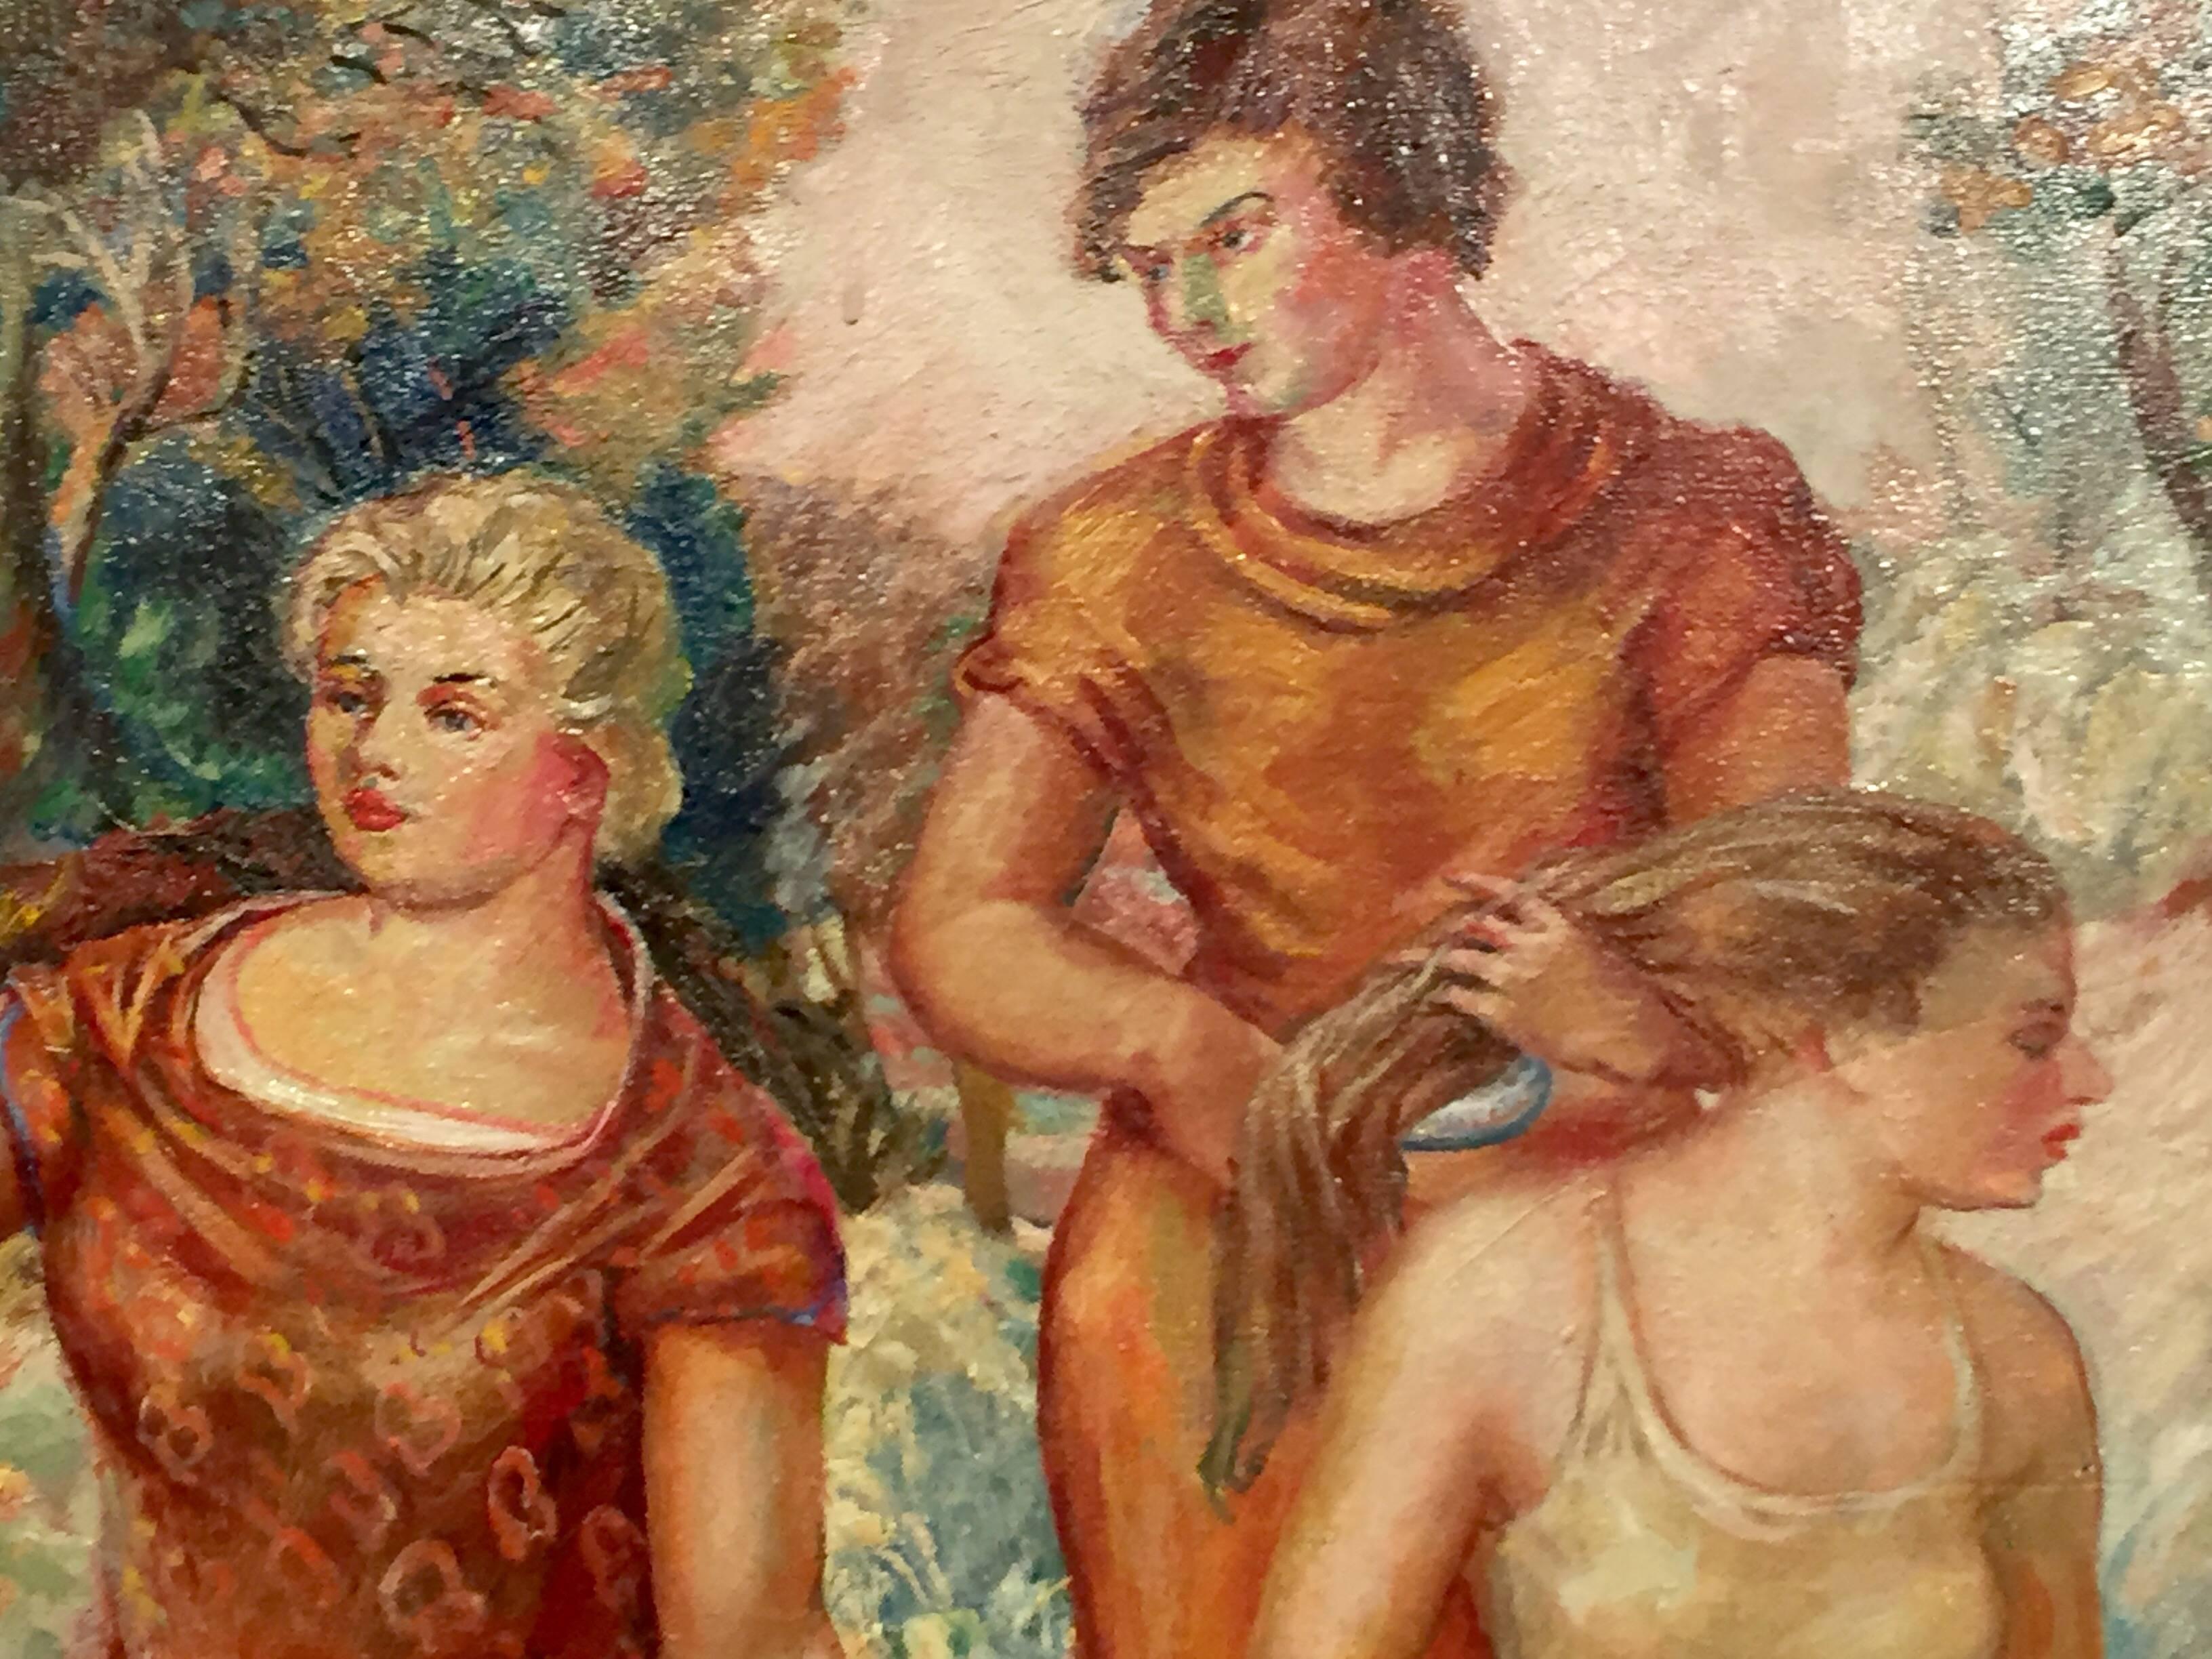 Oil on canvas of three woman in a landscape by the Mid-Western painter Glenn Ranney (1896-1959). Ranney trained in New York at the Art Students League and then returned to Minnesota to paint including a stint working for the Works Progress